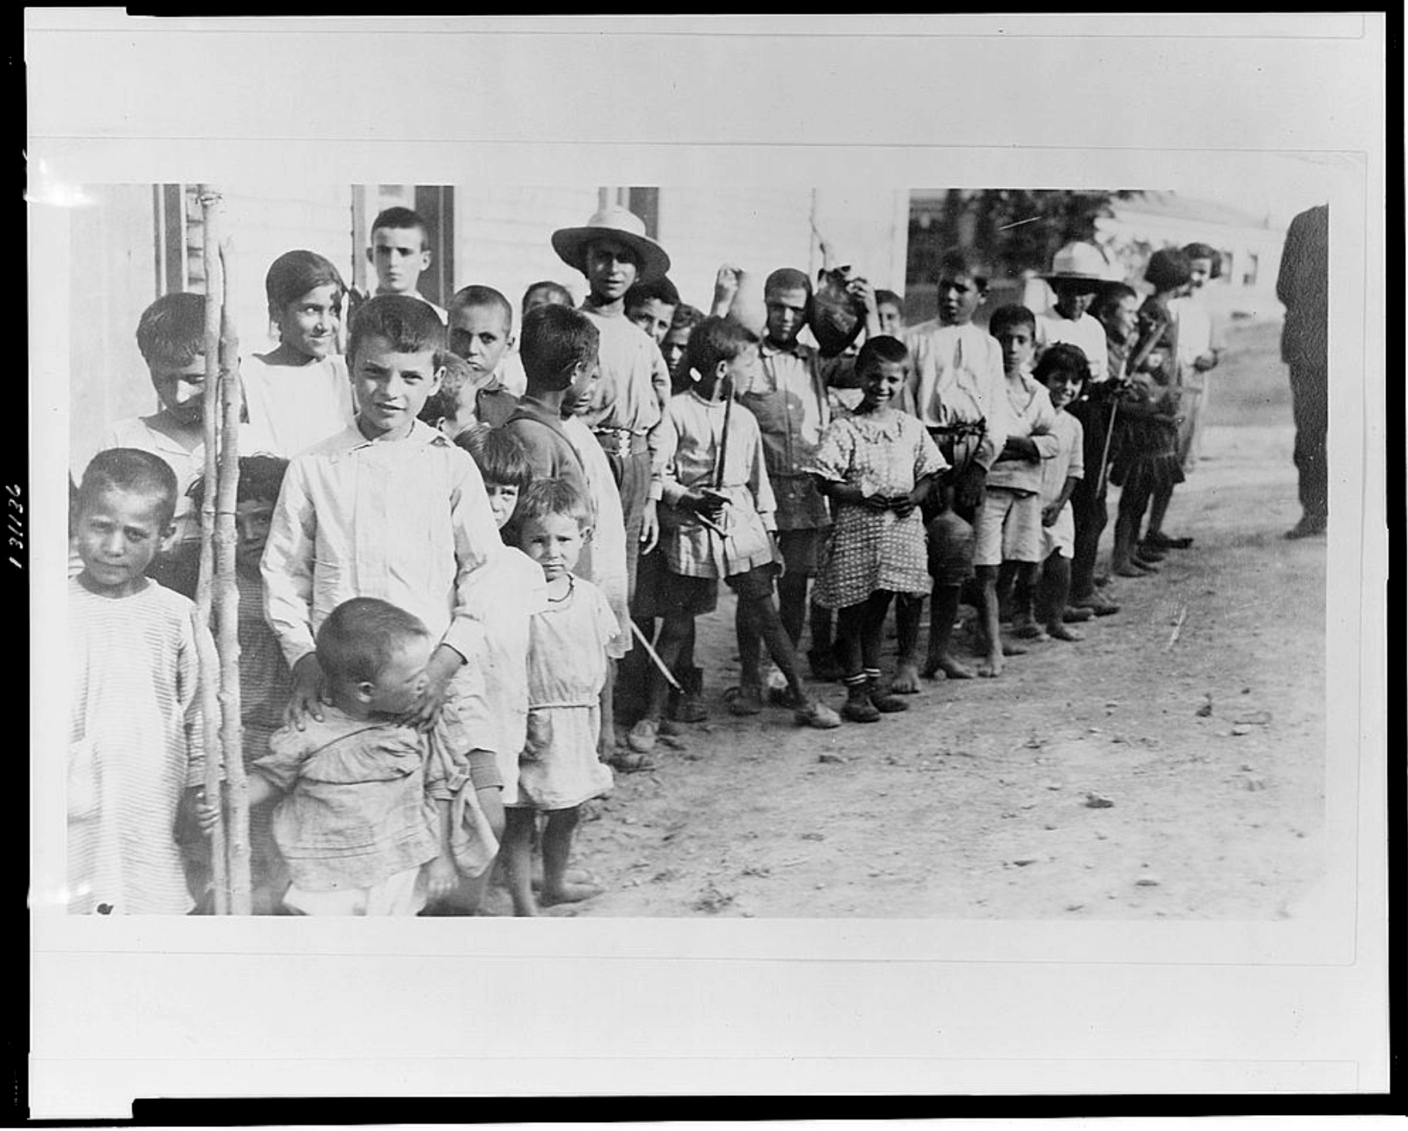 (1923) Greek and Armenian refugee children from Anatolia standing outside one-story building, near Athens, Greece. Greece, 1923. [Photograph] Retrieved from the Library of Congress, https://www.loc.gov/item/2002709161/.